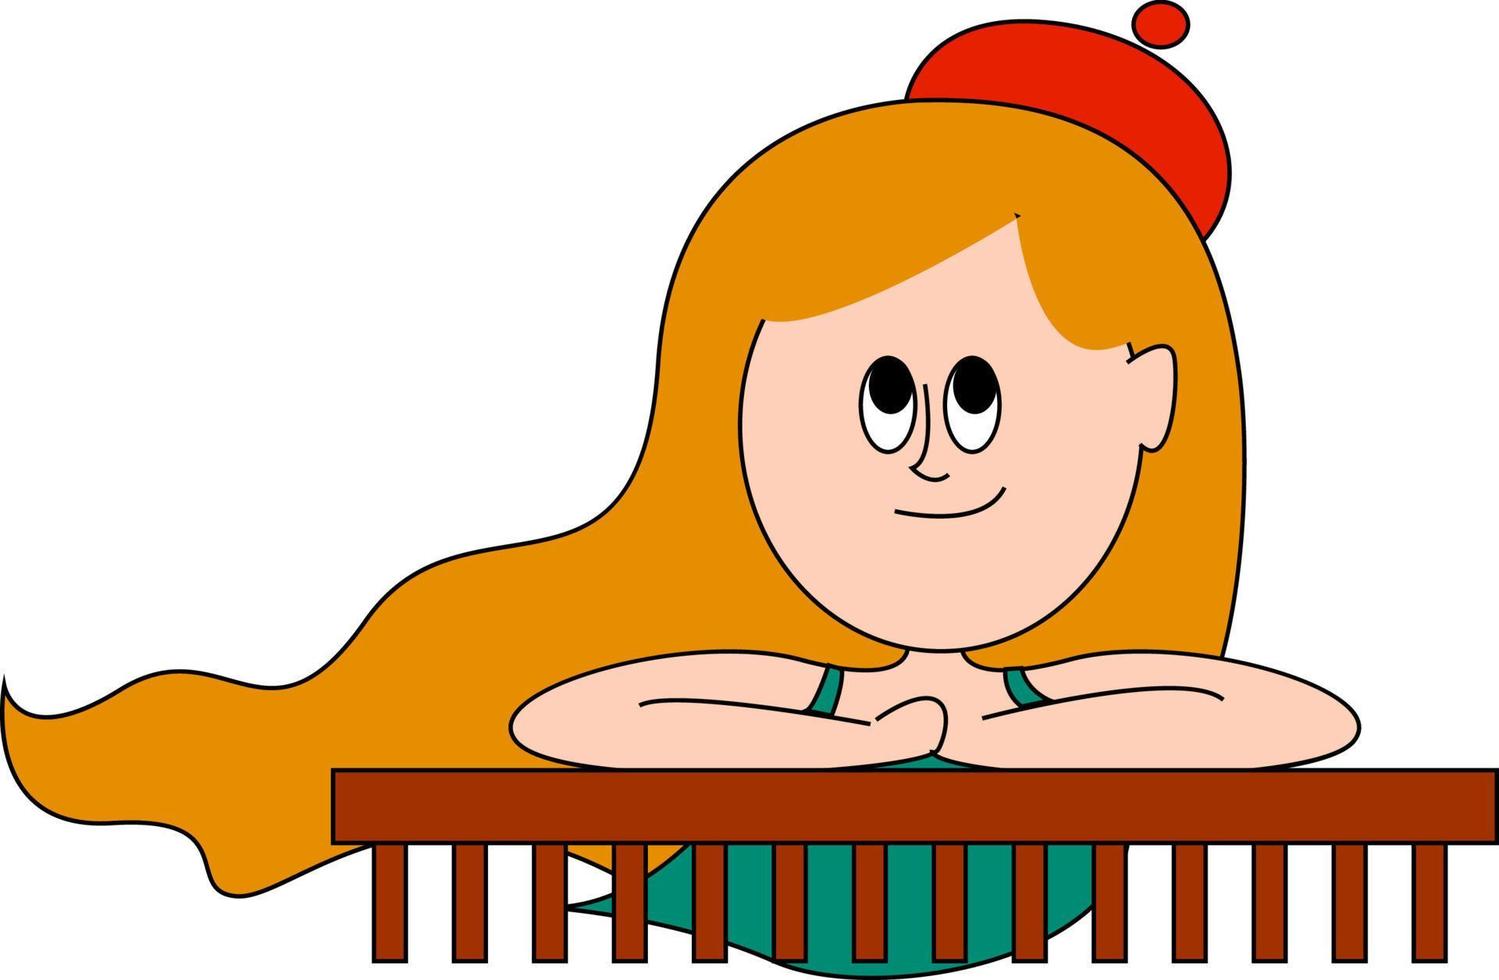 Blonde girl wearing a red hat, illustration, vector on white background.